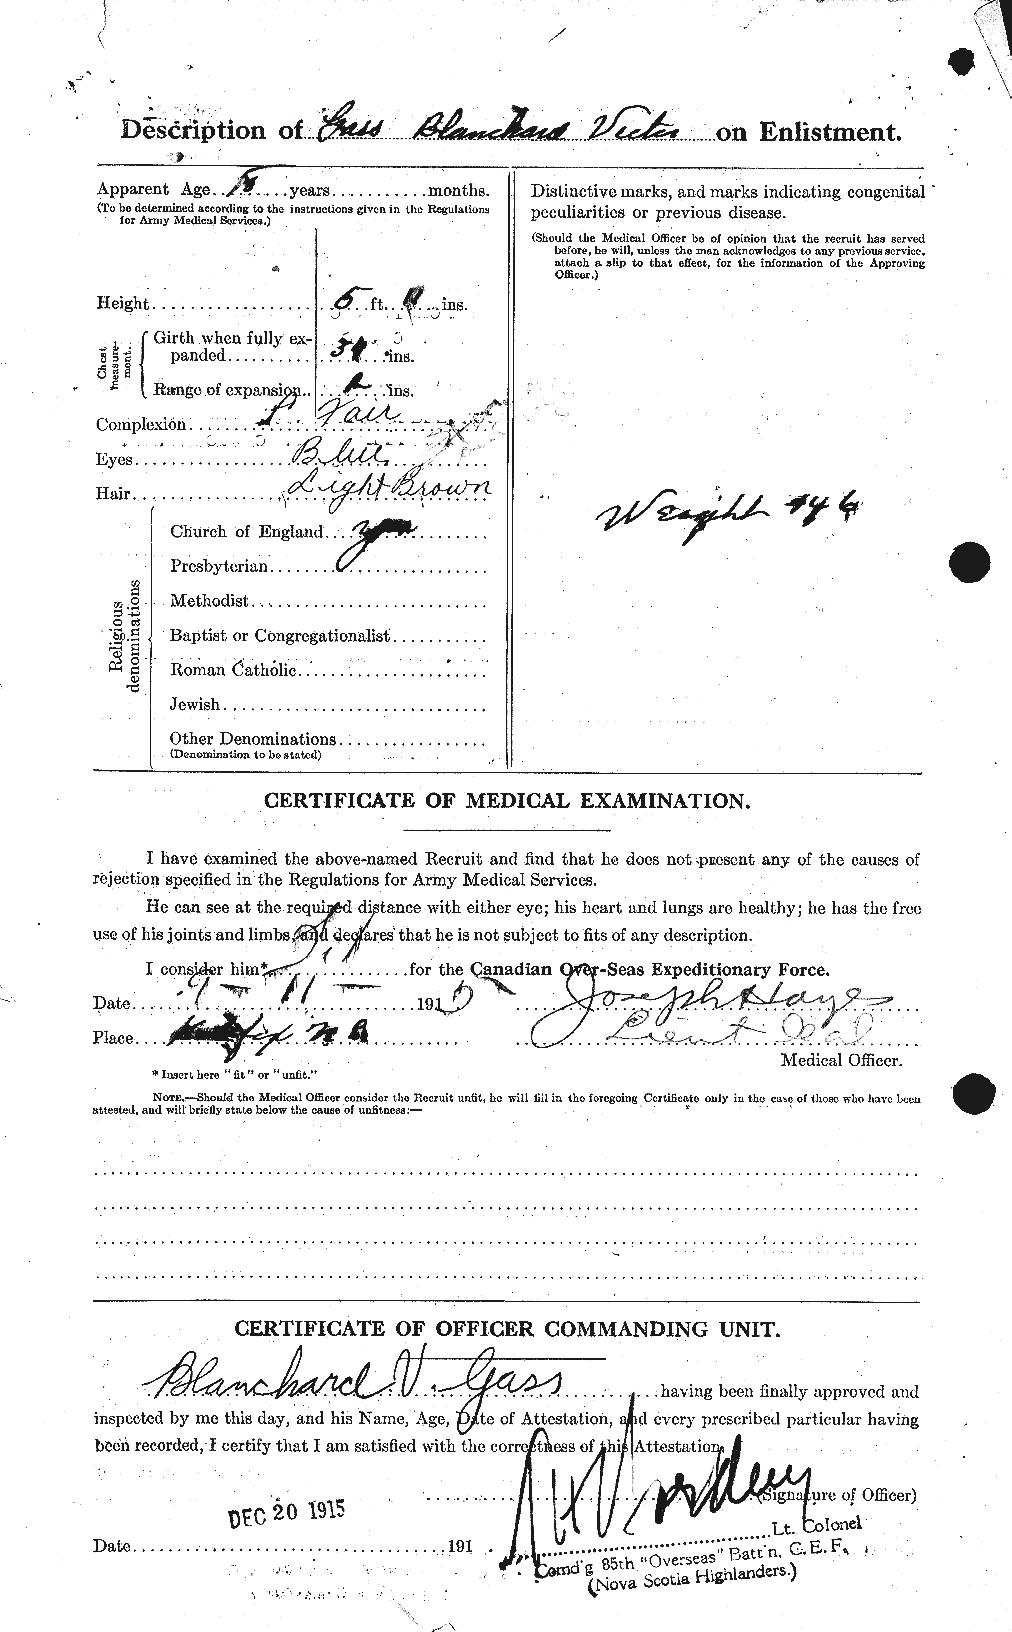 Personnel Records of the First World War - CEF 341599b